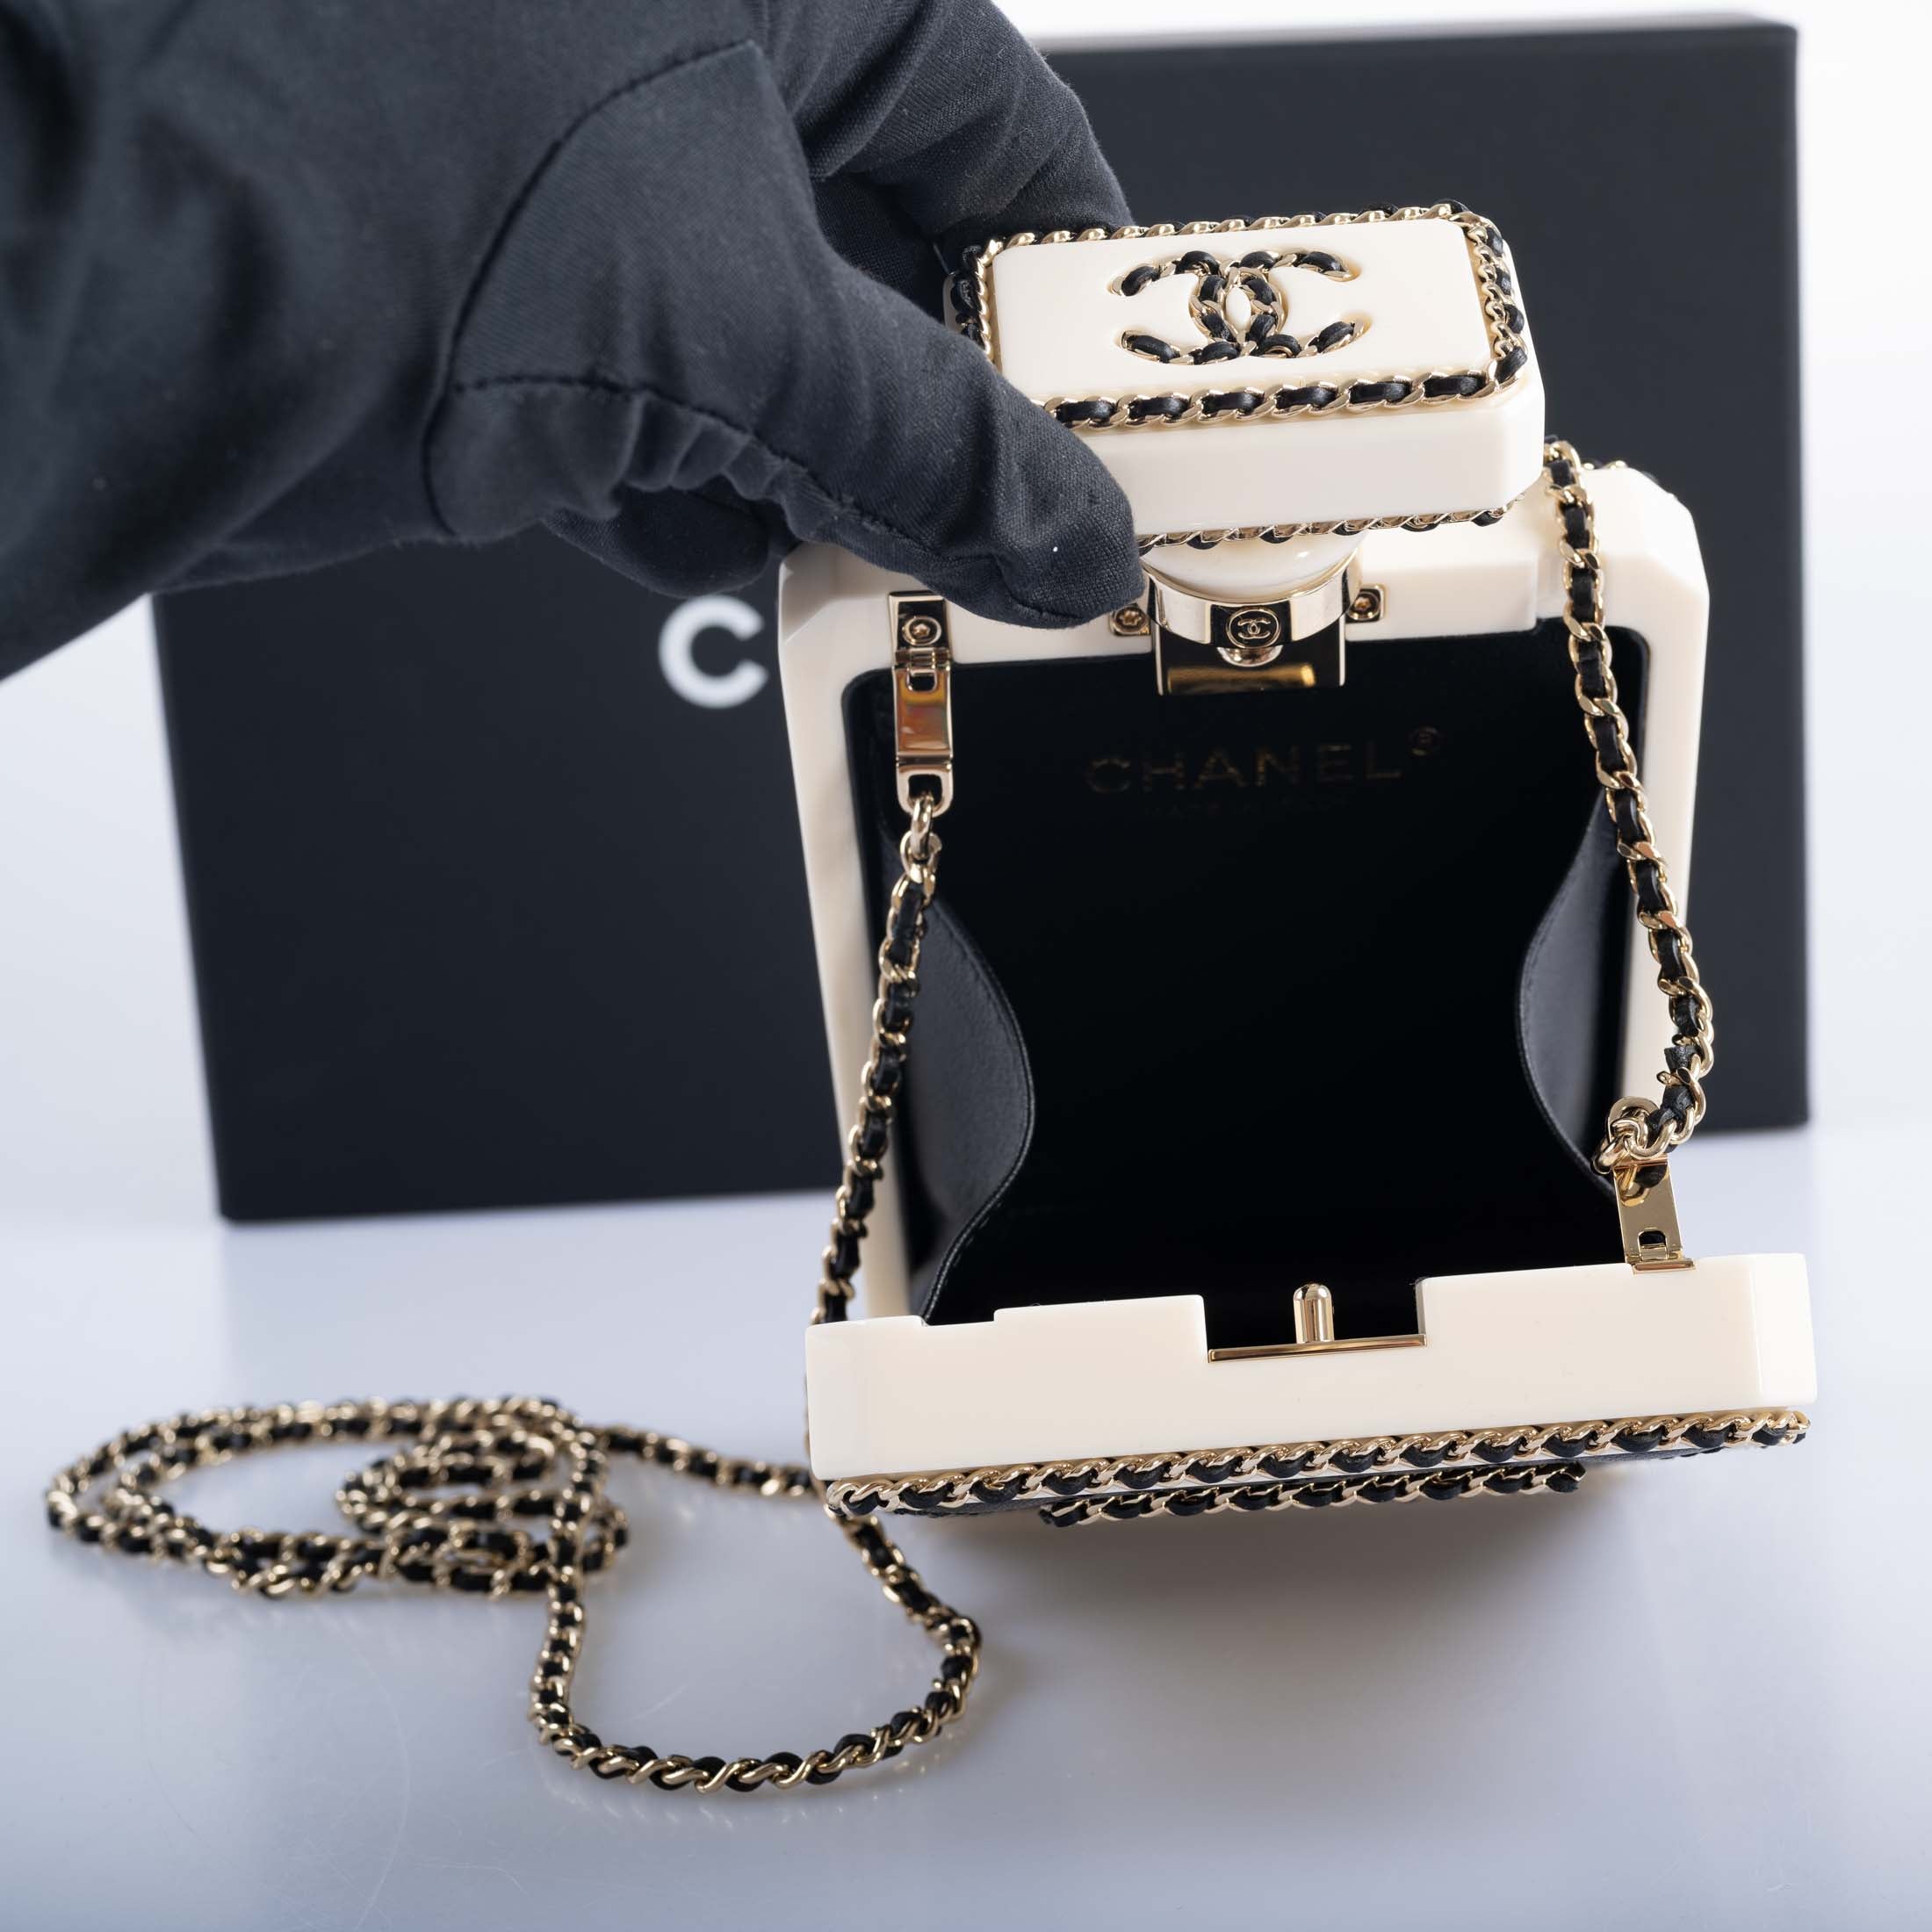 CHANEL Black Quilted Leather and White Perspex Perfume Bottle Minaudiere Gold Hardware